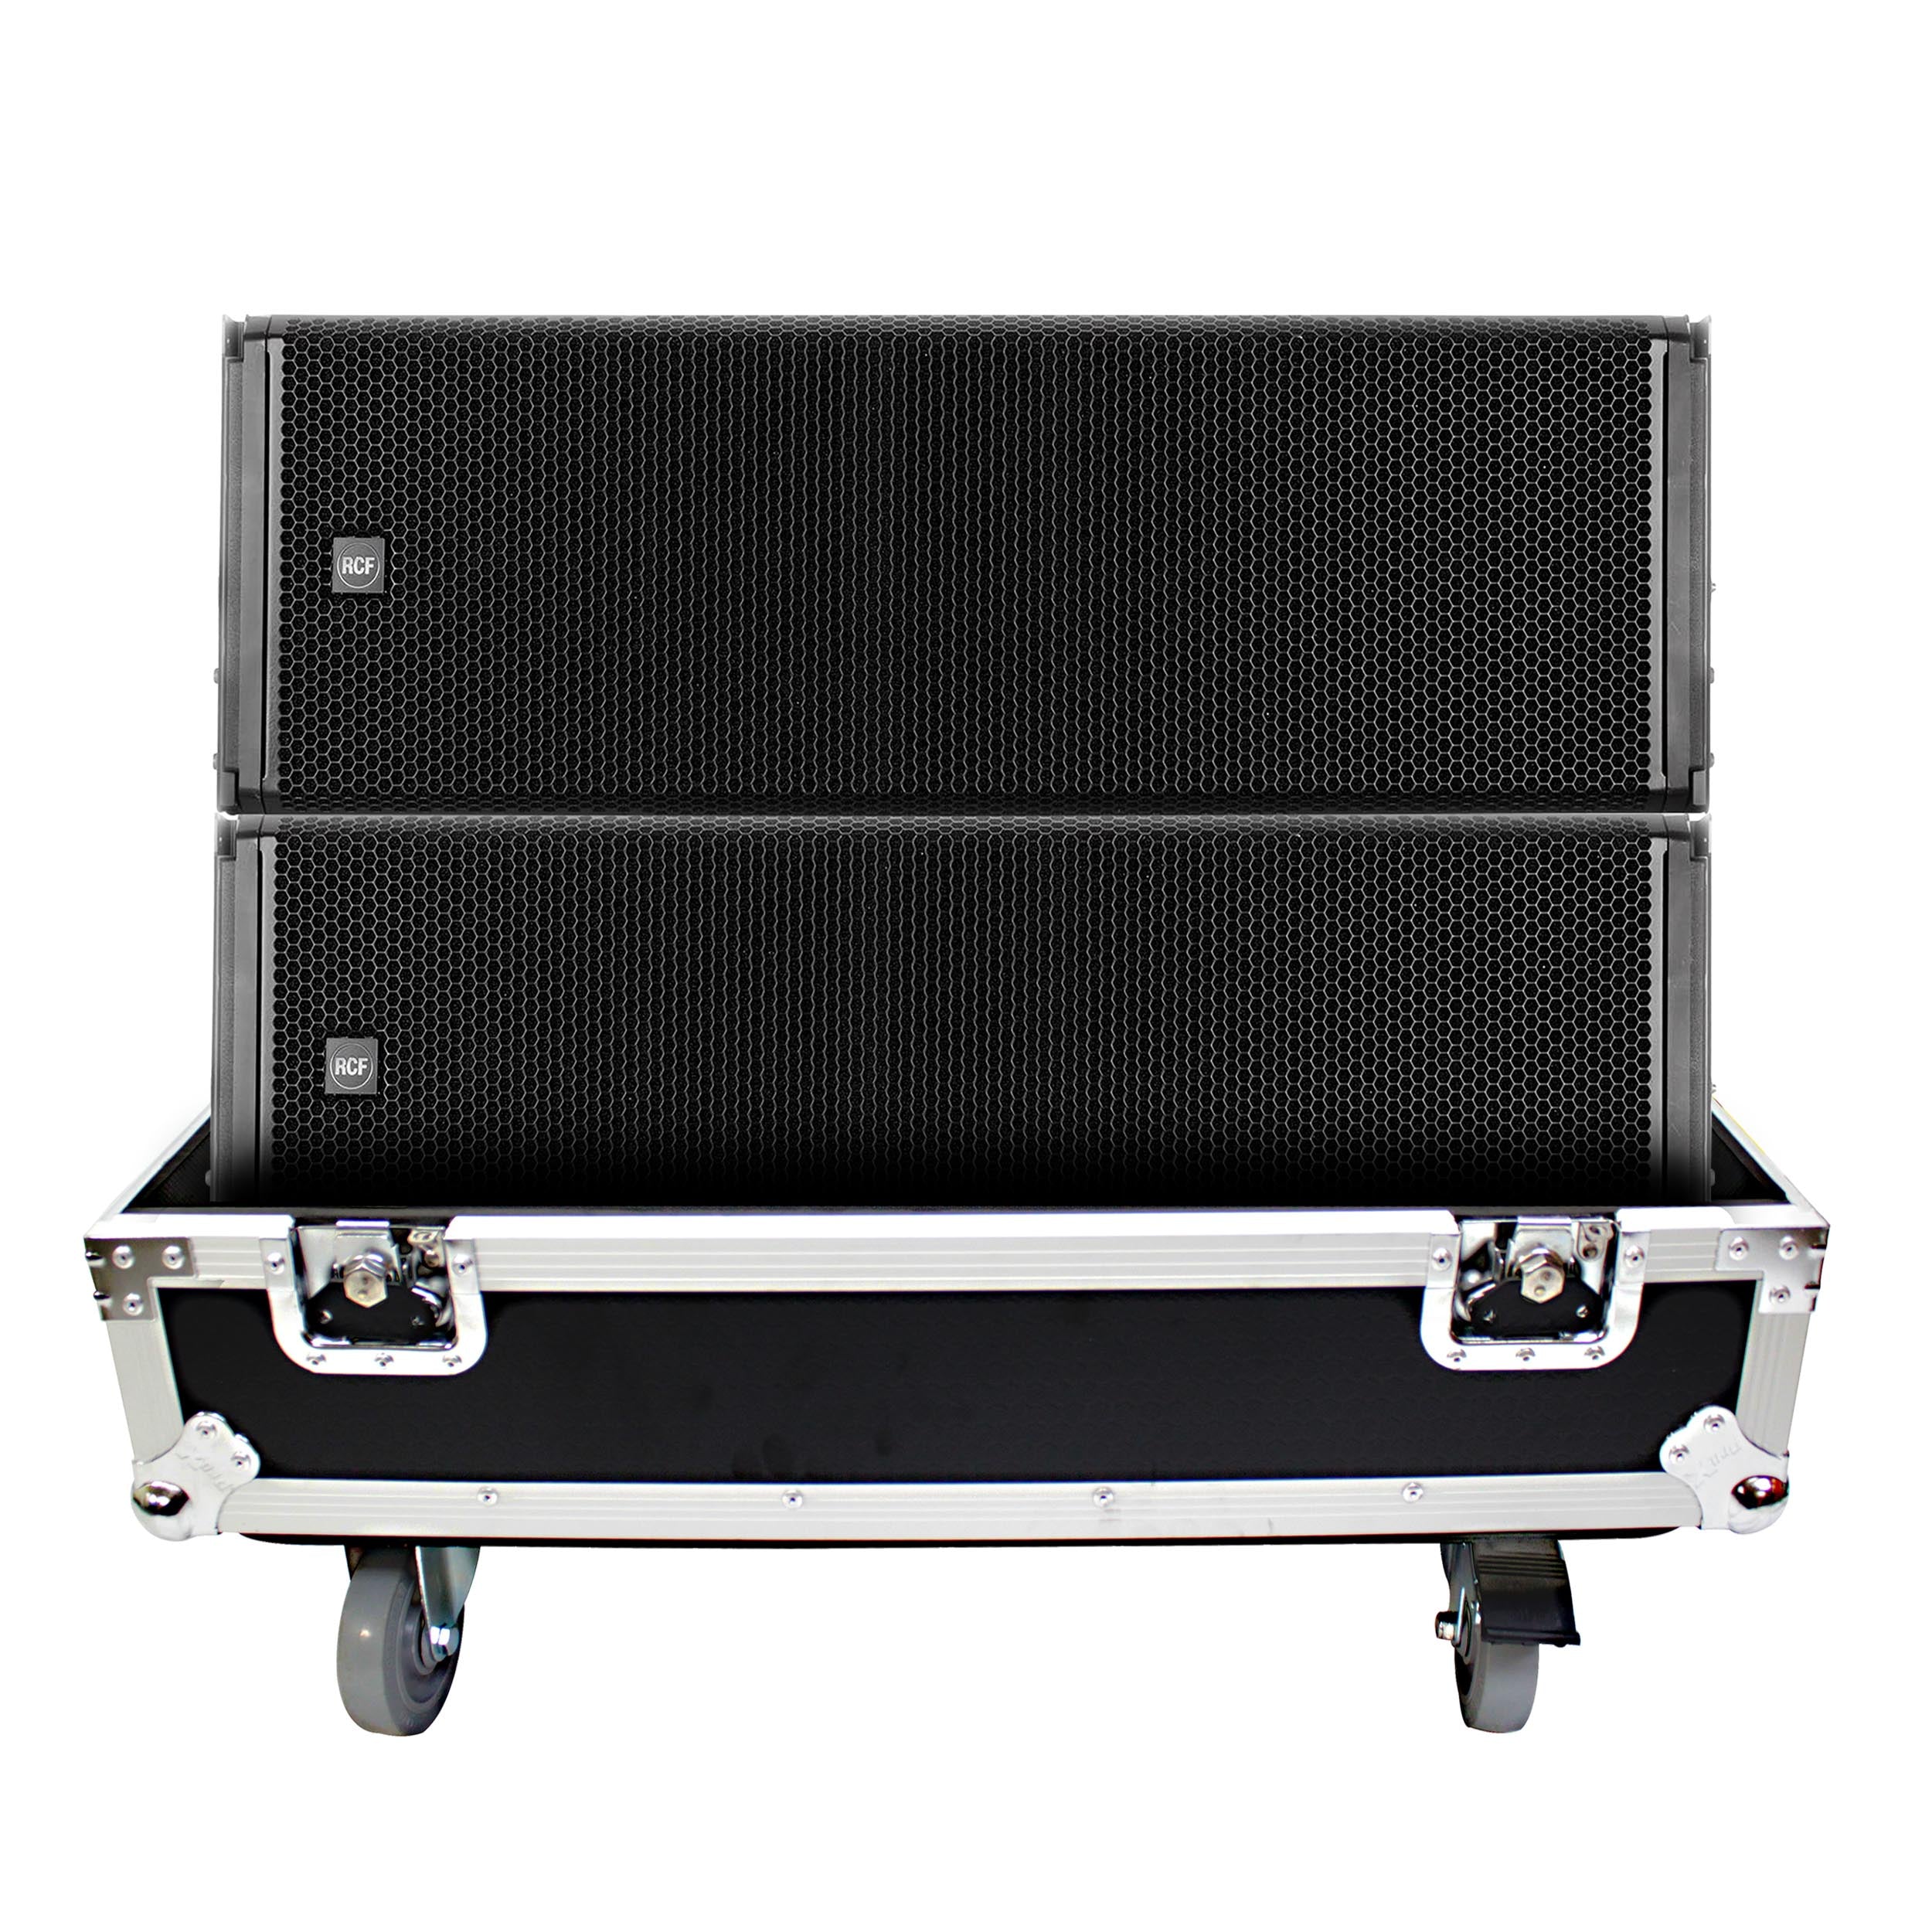 Pro X Fits RCF HDL 30-A Line Array Speaker Flight Case W/Wheels (Holds 2 Speakers) X-RCF-HDL30A LAX2W